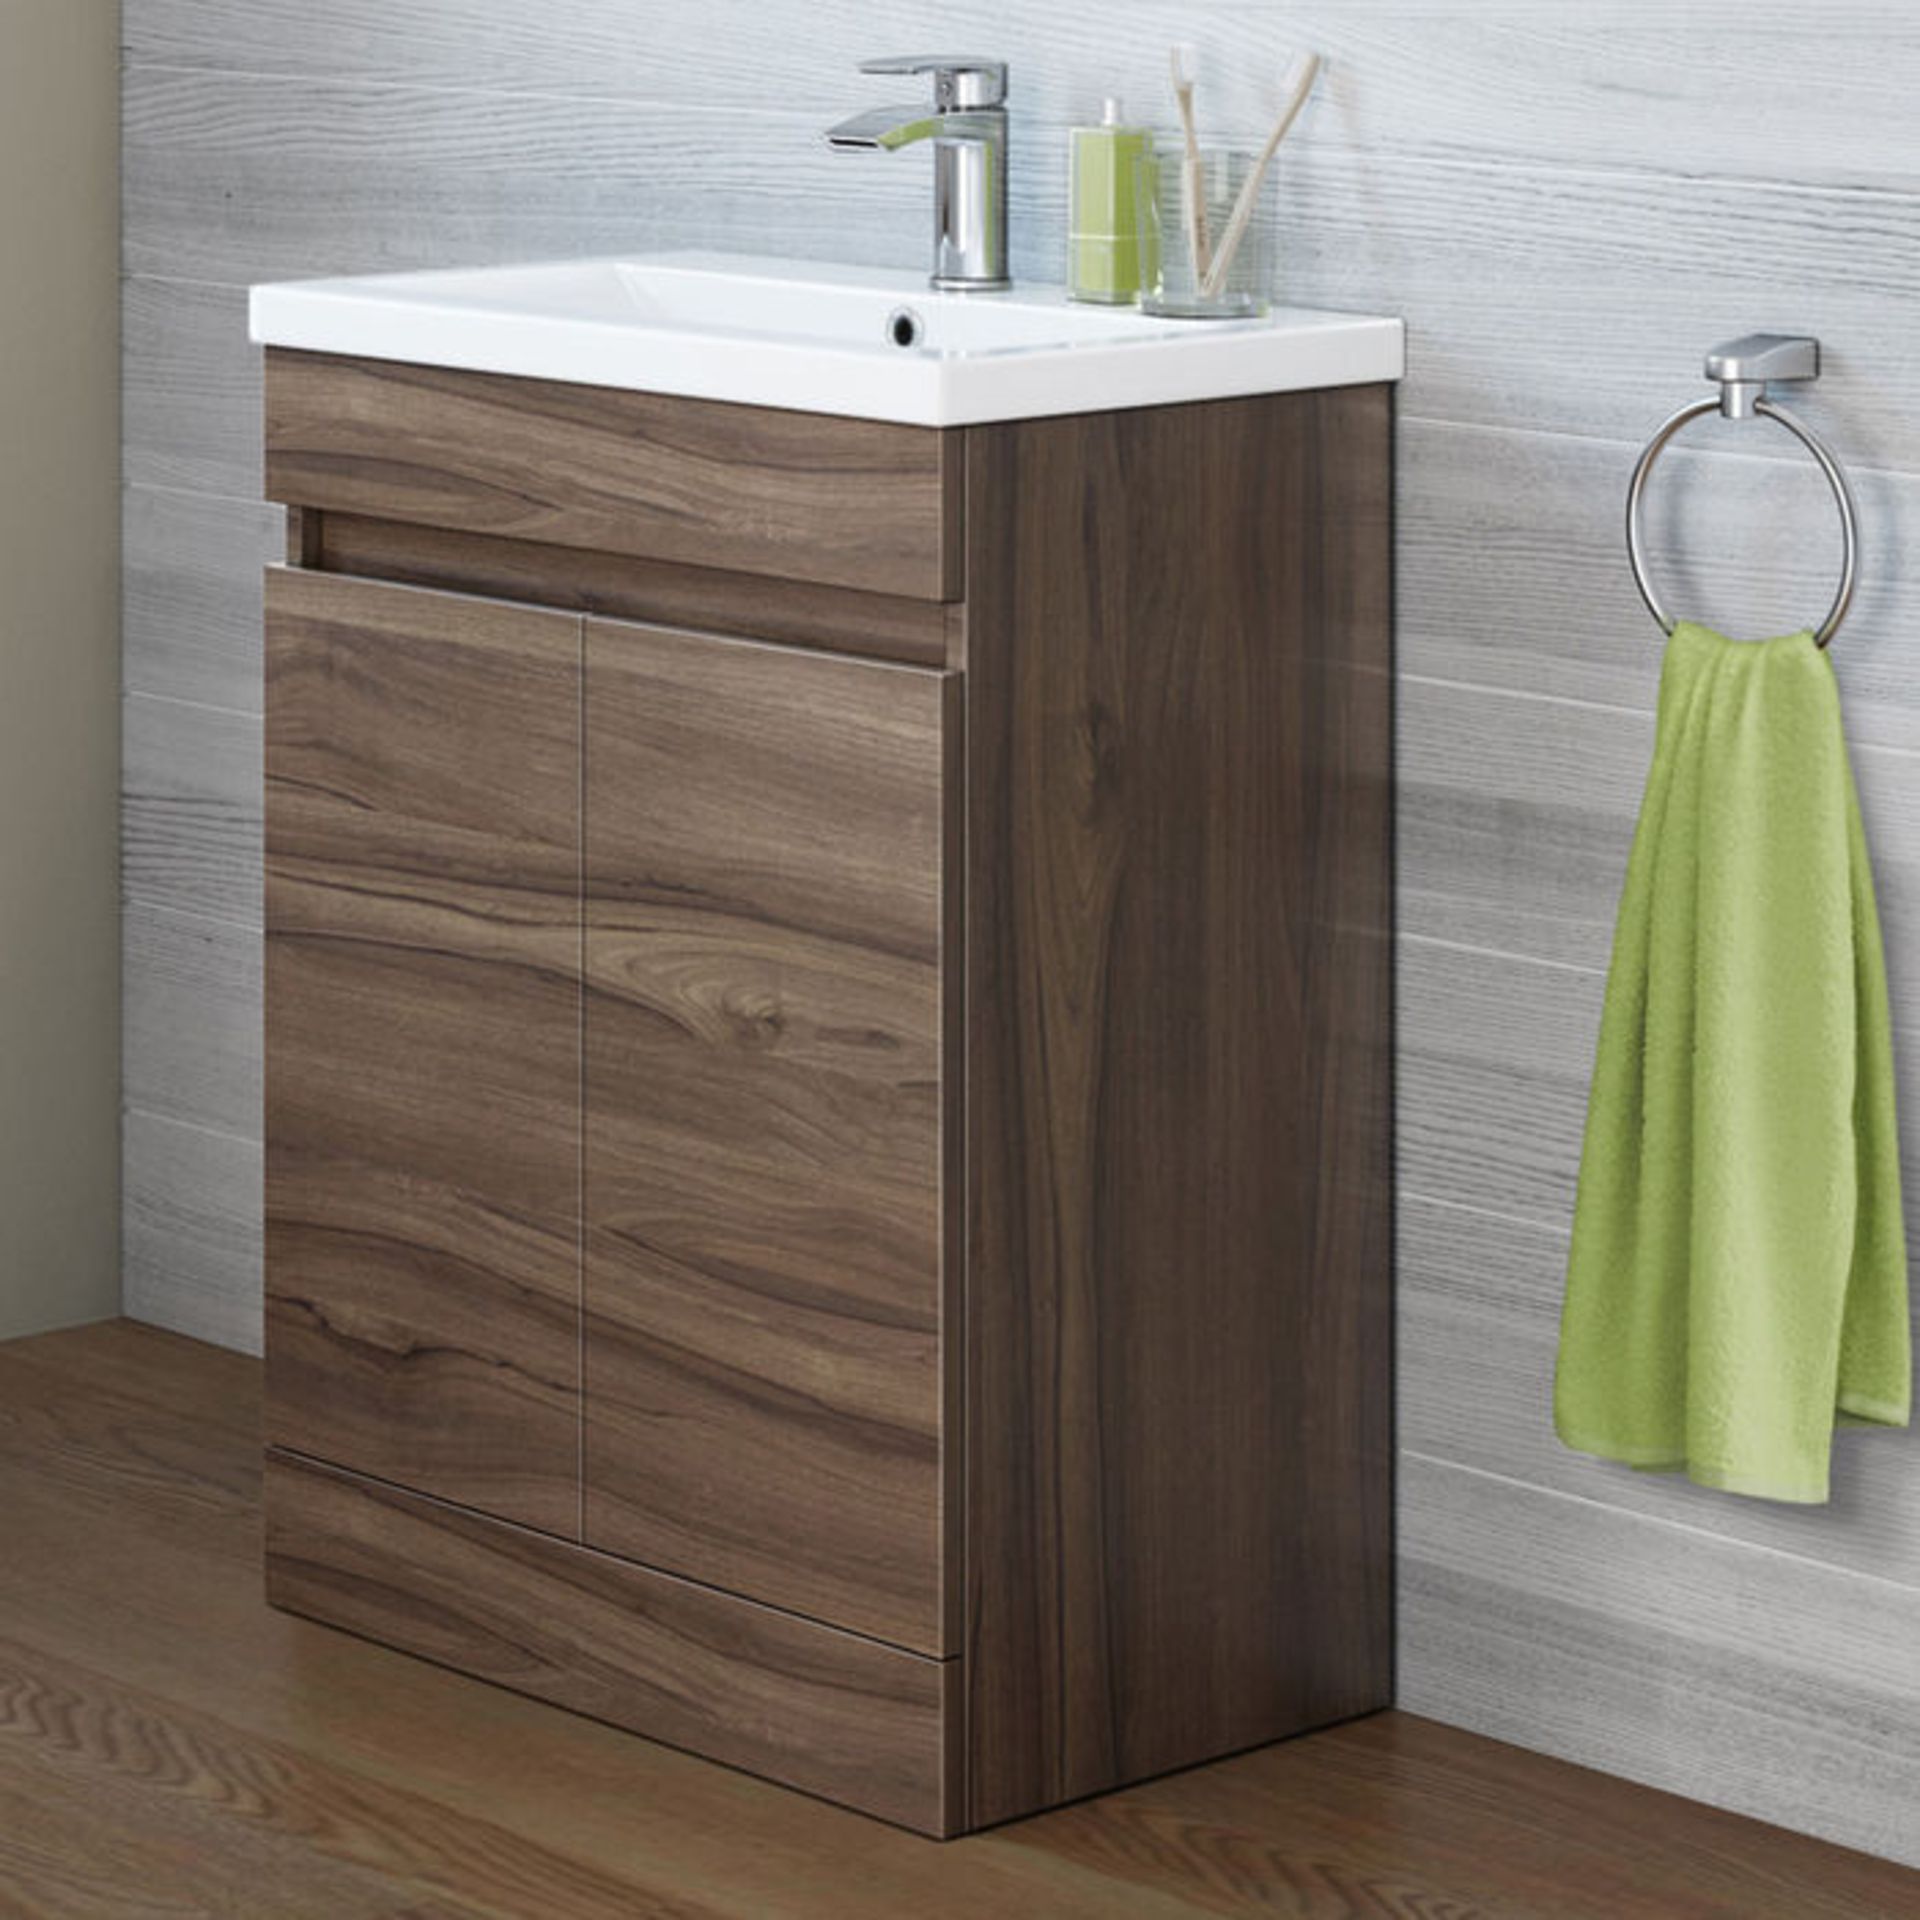 (ZZ52) 600mm Trent Walnut Effect Basin Cabinet - Floor Standing. RRP £499.99. COMES COMPLETE WITH